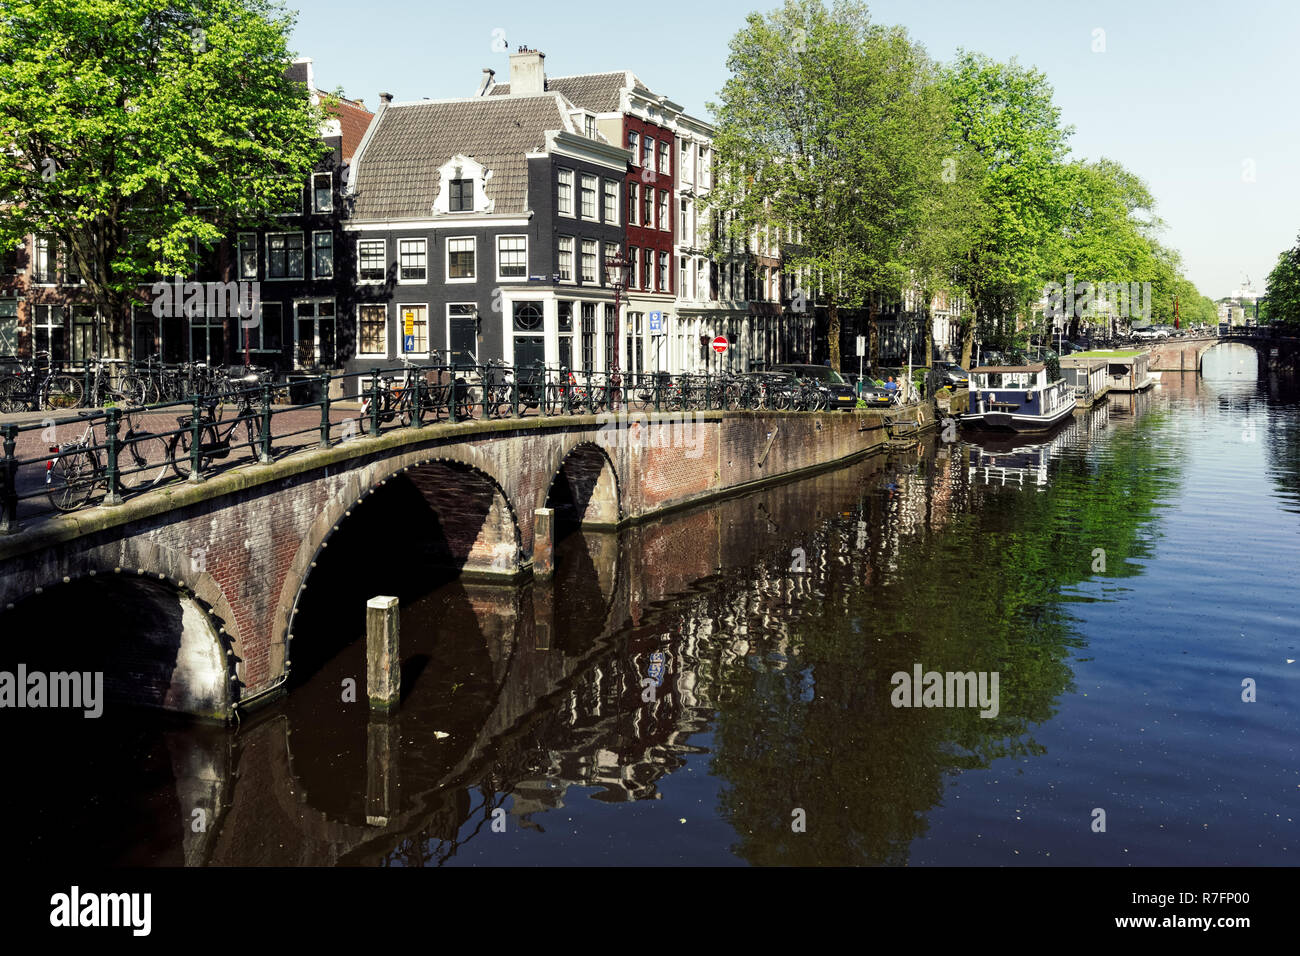 Il canale Keizersgracht in Amsterdam, Paesi Bassi Foto Stock